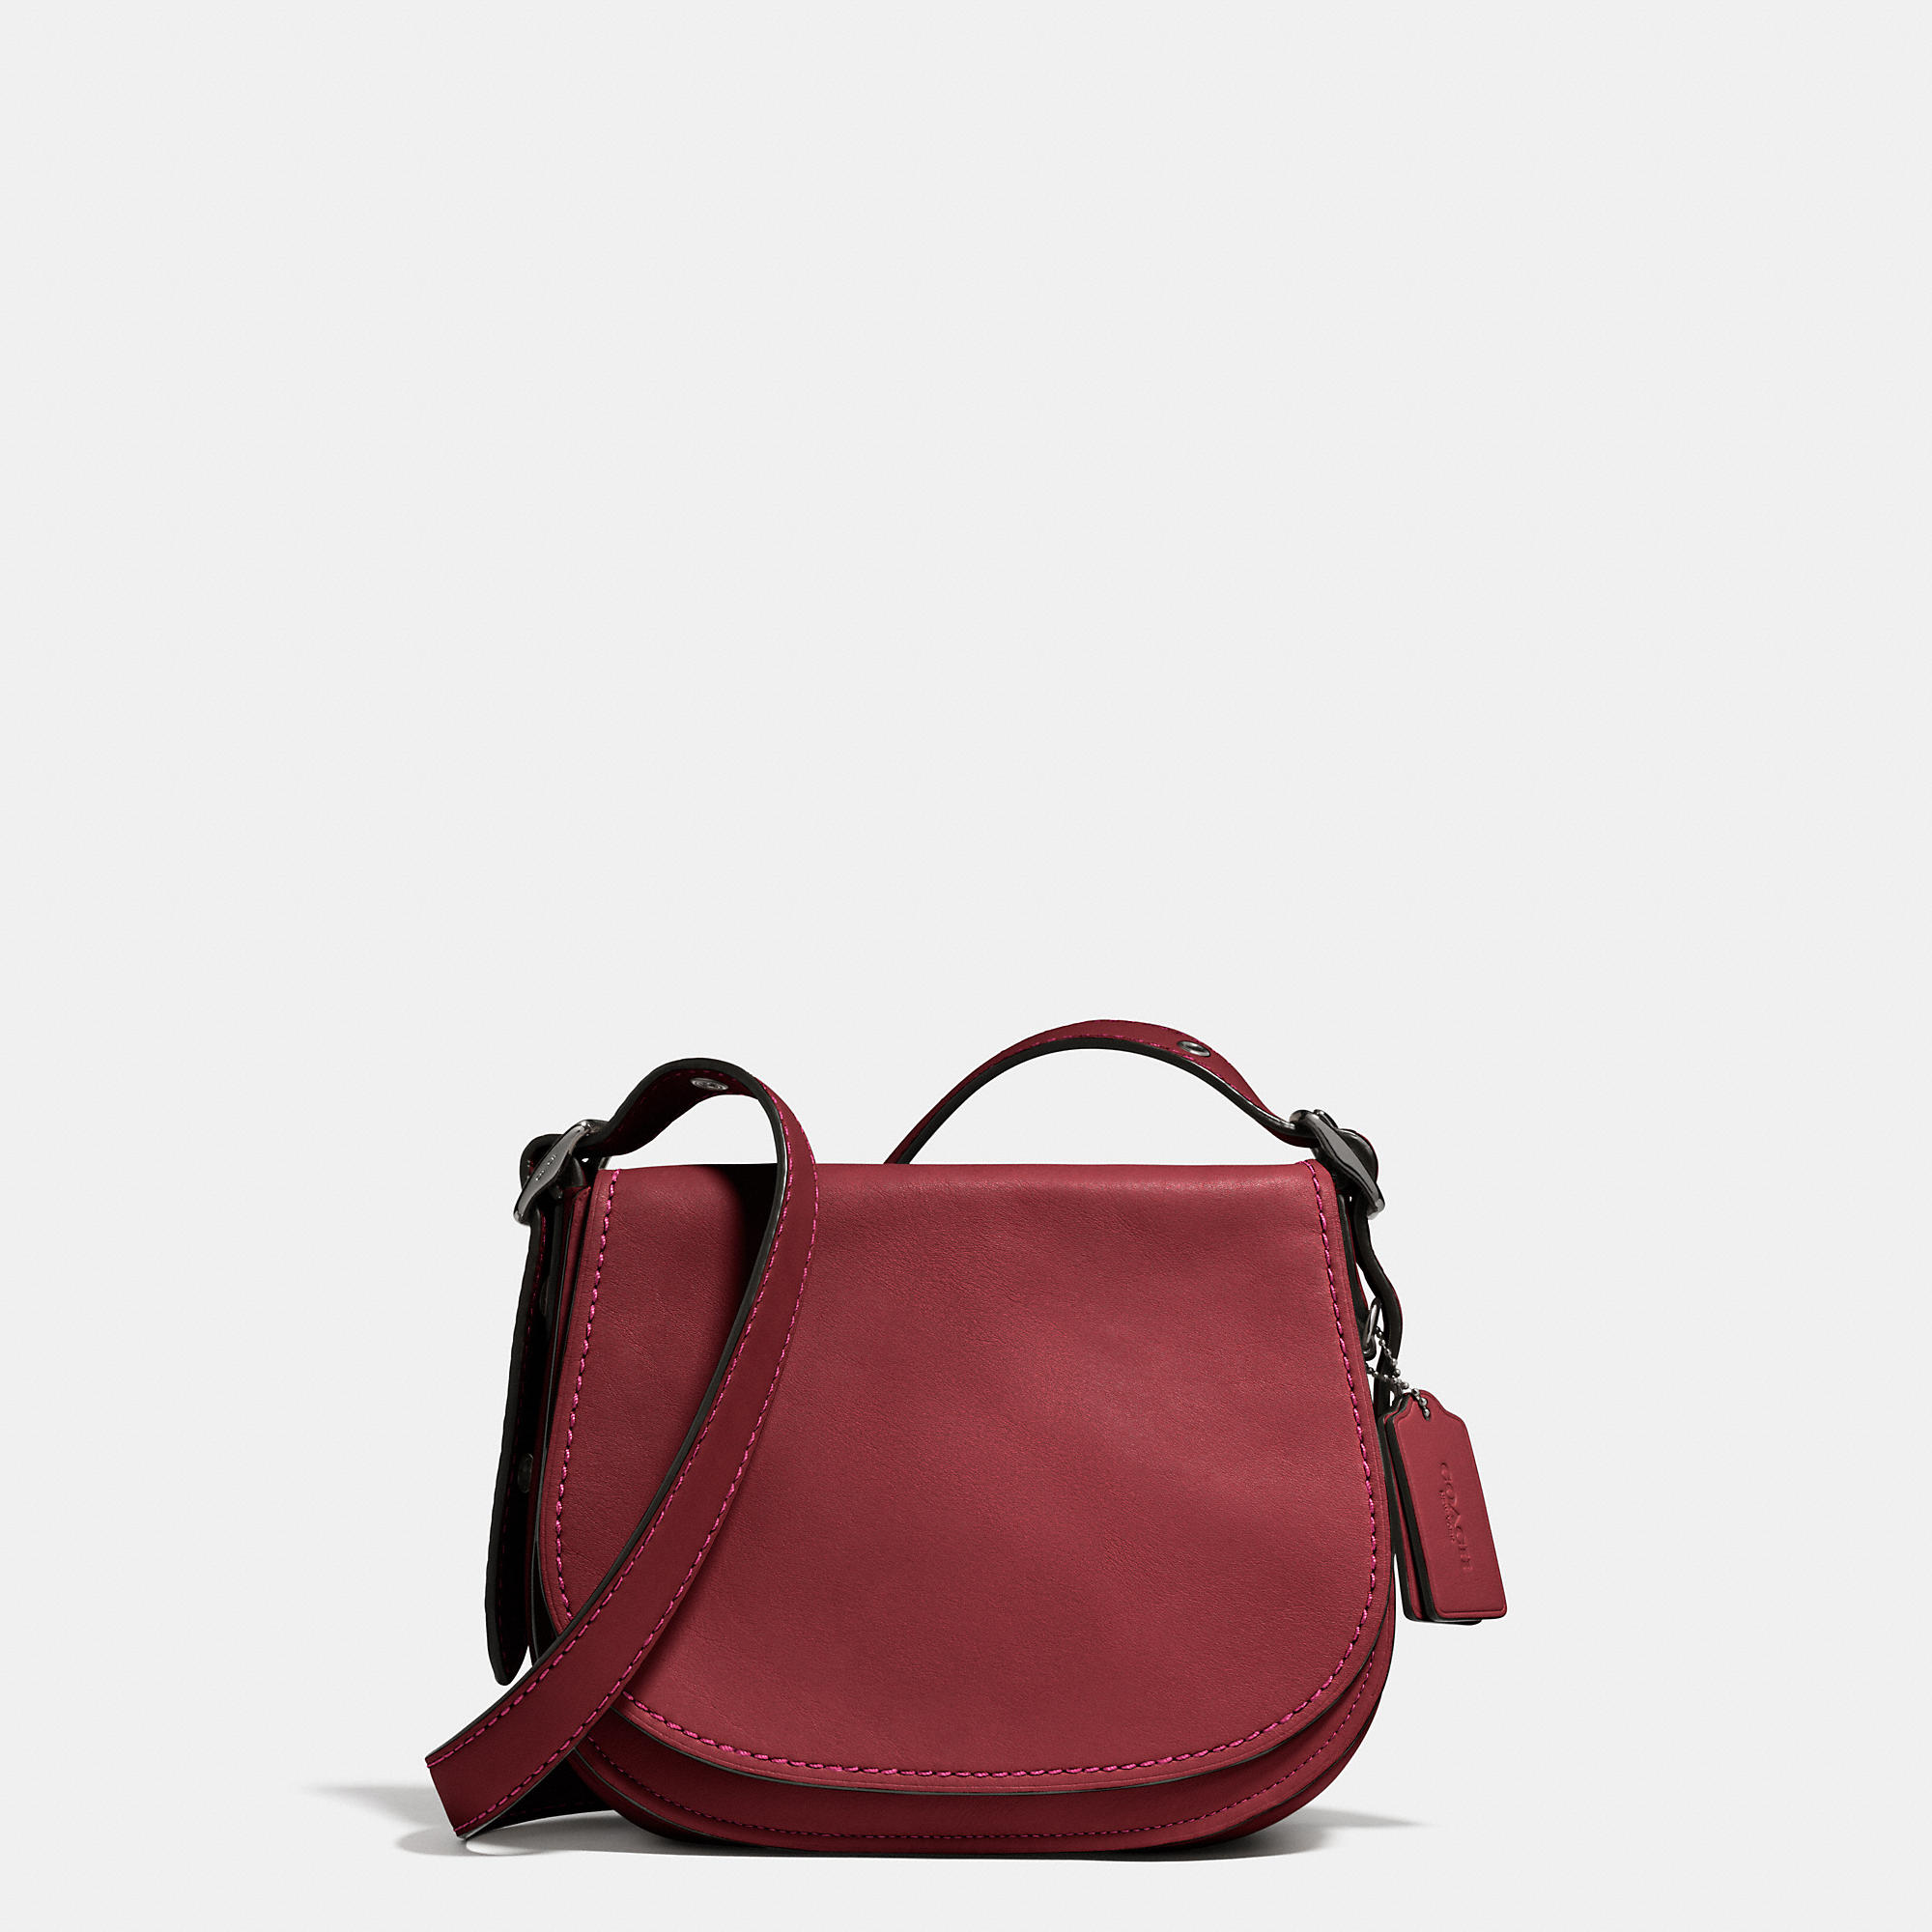 Luxury Brand Coach Saddle Bag 23 In Glovetanned Leather | Coach Outlet Canada